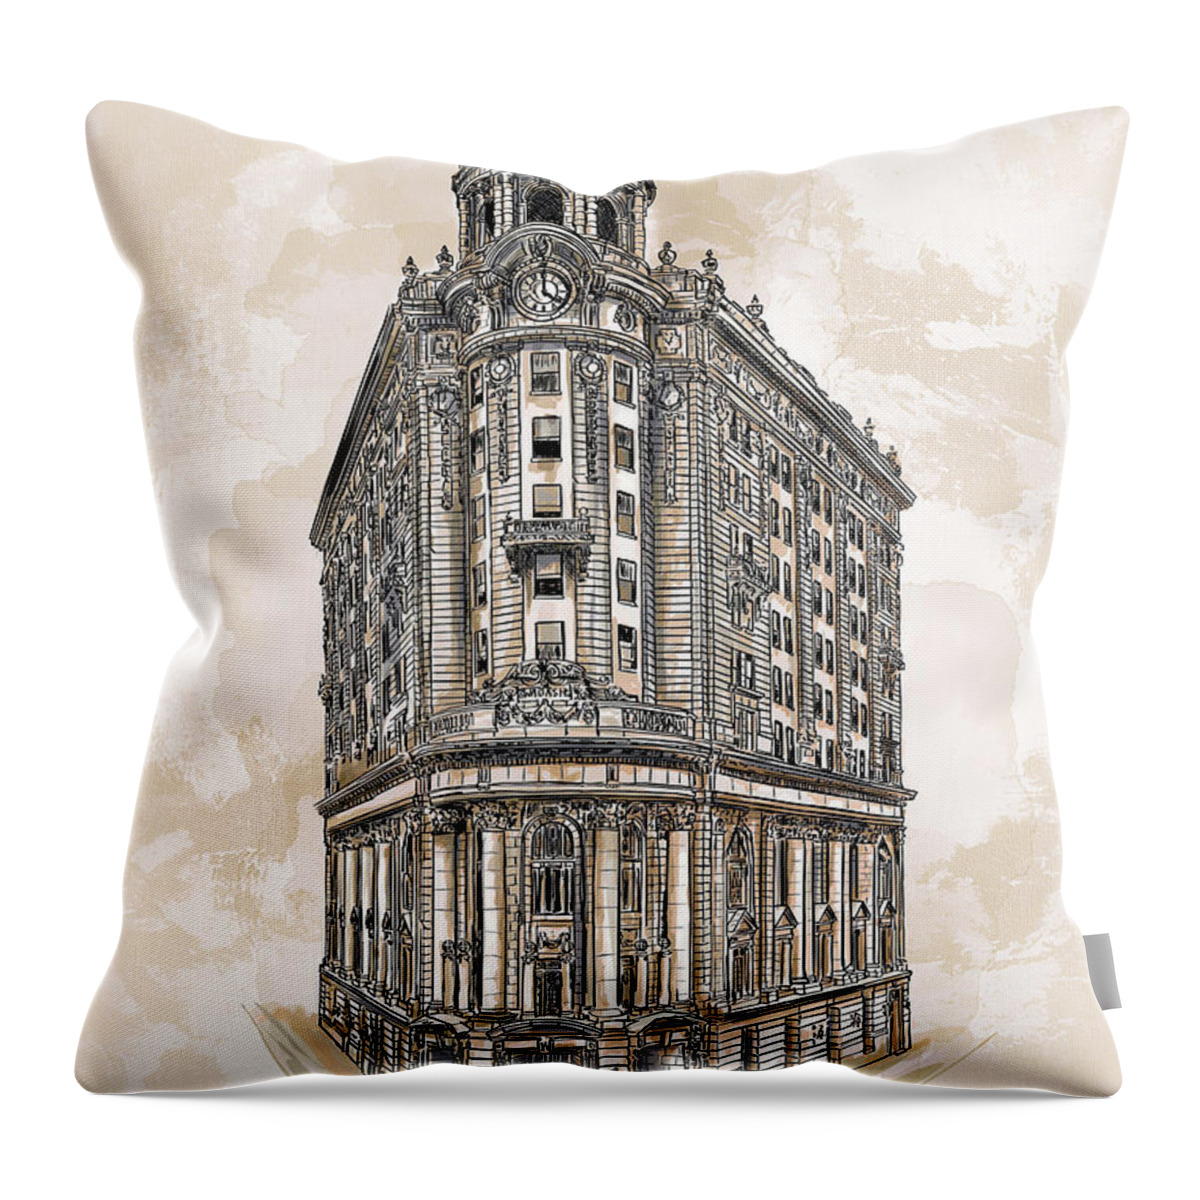 Station Throw Pillow featuring the painting Wabash Station Pittsburgh, Pennsylvania, circa 1905 by Andrzej Szczerski